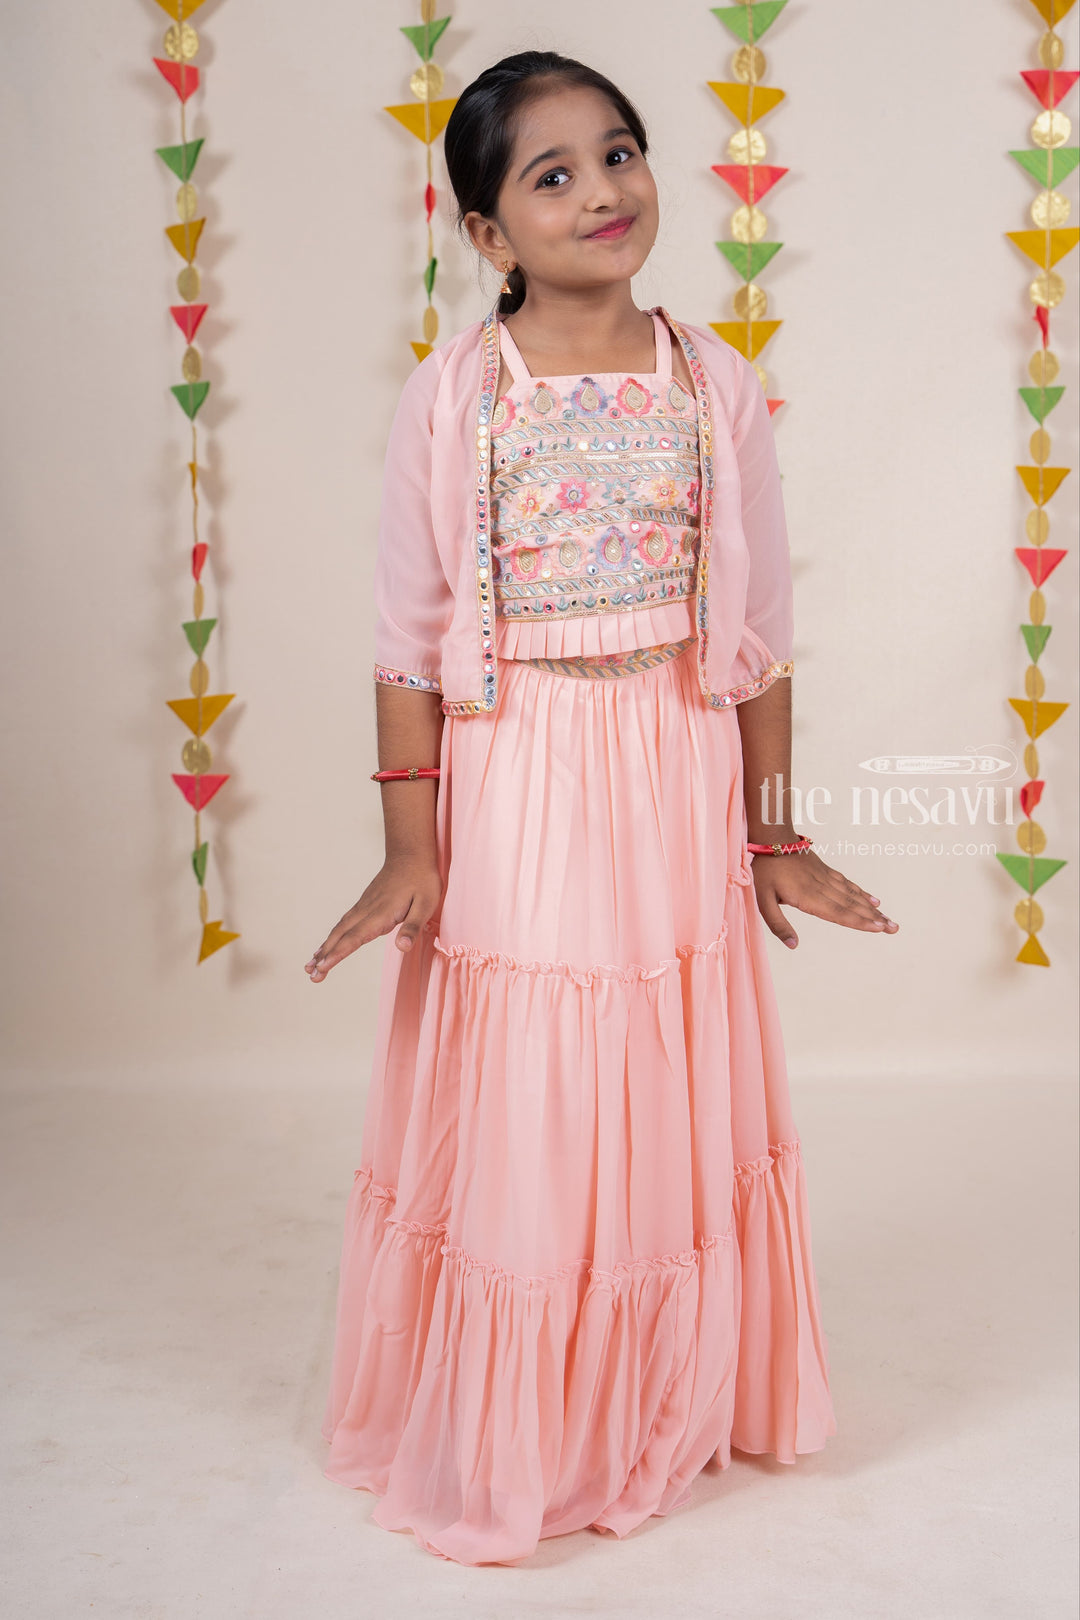 The Nesavu Lehenga & Ghagra Gorgeous Salmon Pink Floral Embroidered Top With Overcoat Anarkali Dress For Girls Nesavu Pink / 16 (1Y) / Georgette GL153C-16